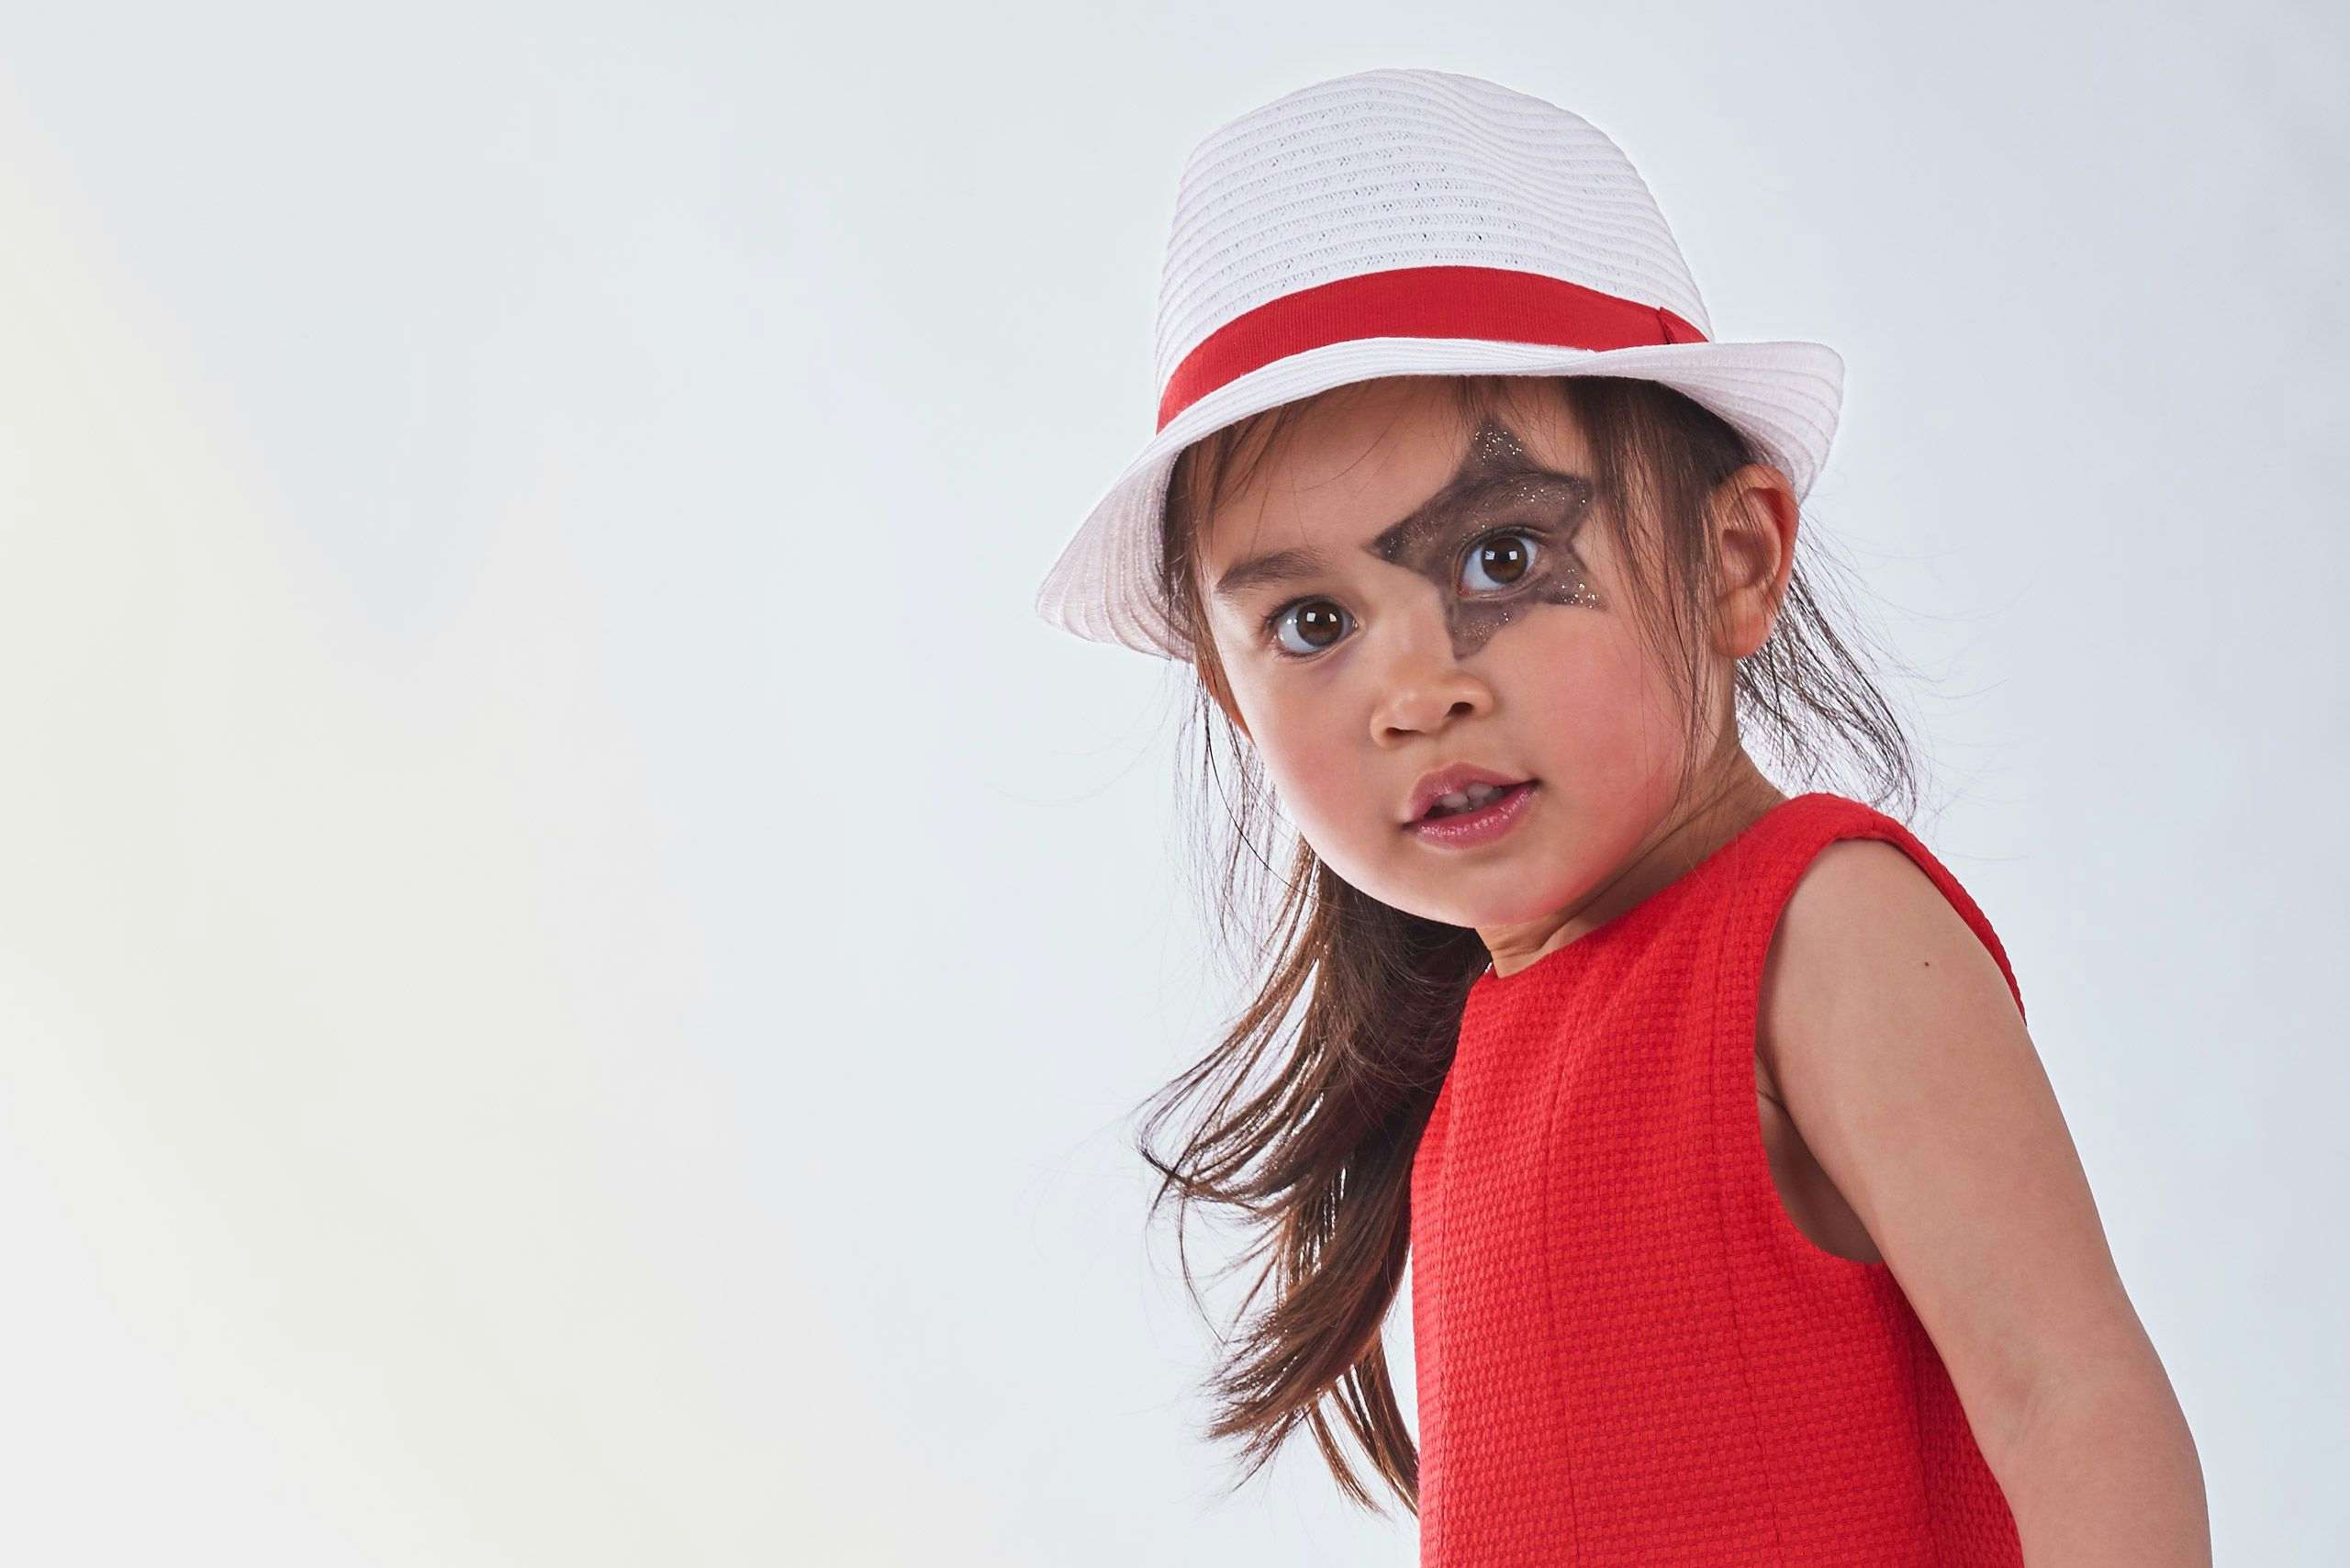 Model Zoe photographed in a Marese dress by Xavier Wendling for BigBen Kids